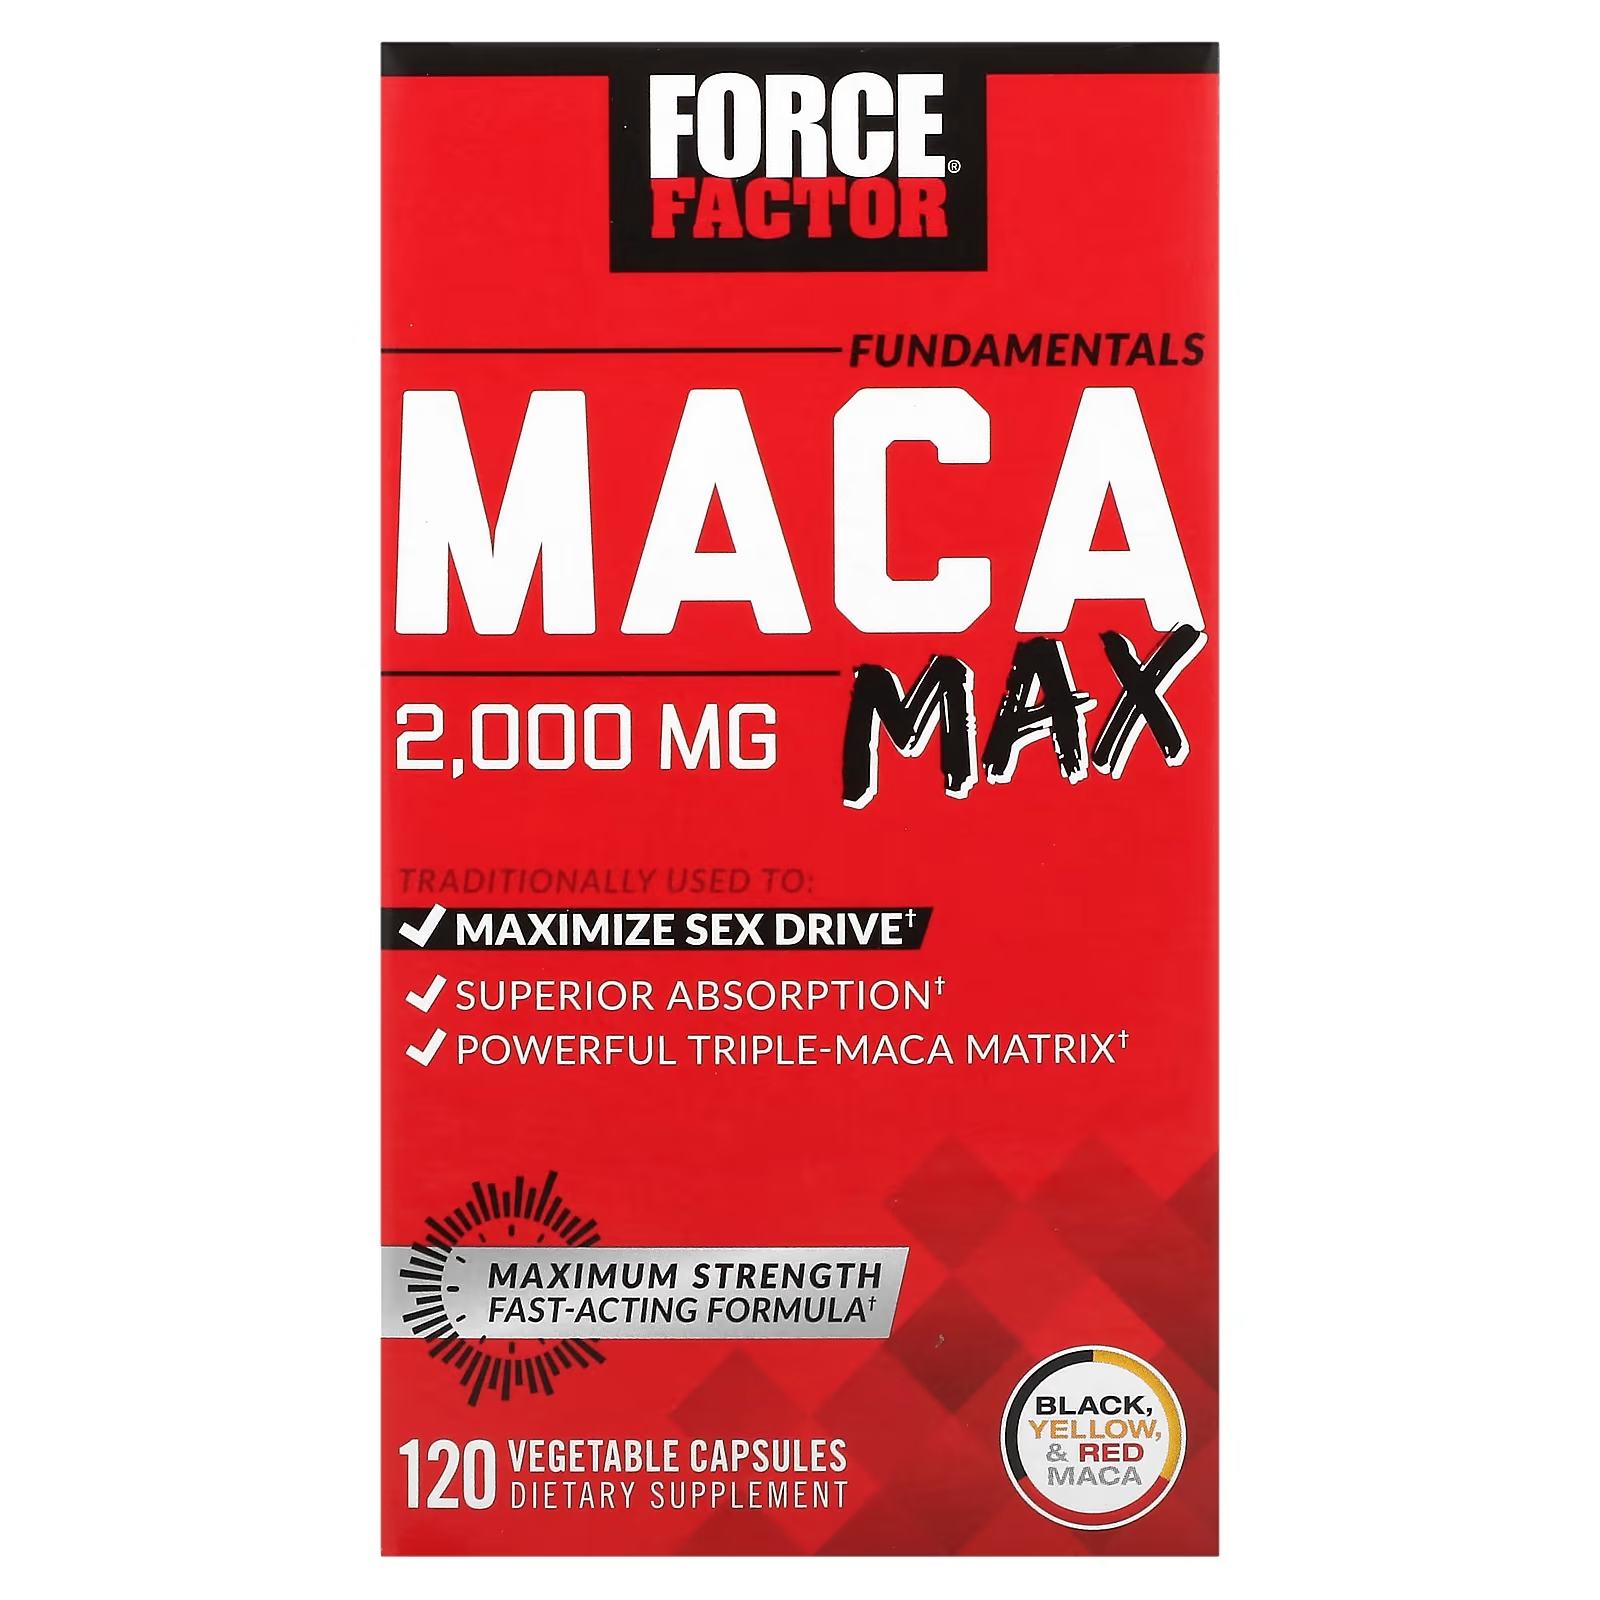 Мака Force Factor Fundamentals Max 2000 мг, 120 капсул (500 мг на капсулу) l аргинин 3000 мг 150 капсул 600 мг на капсулу force factor